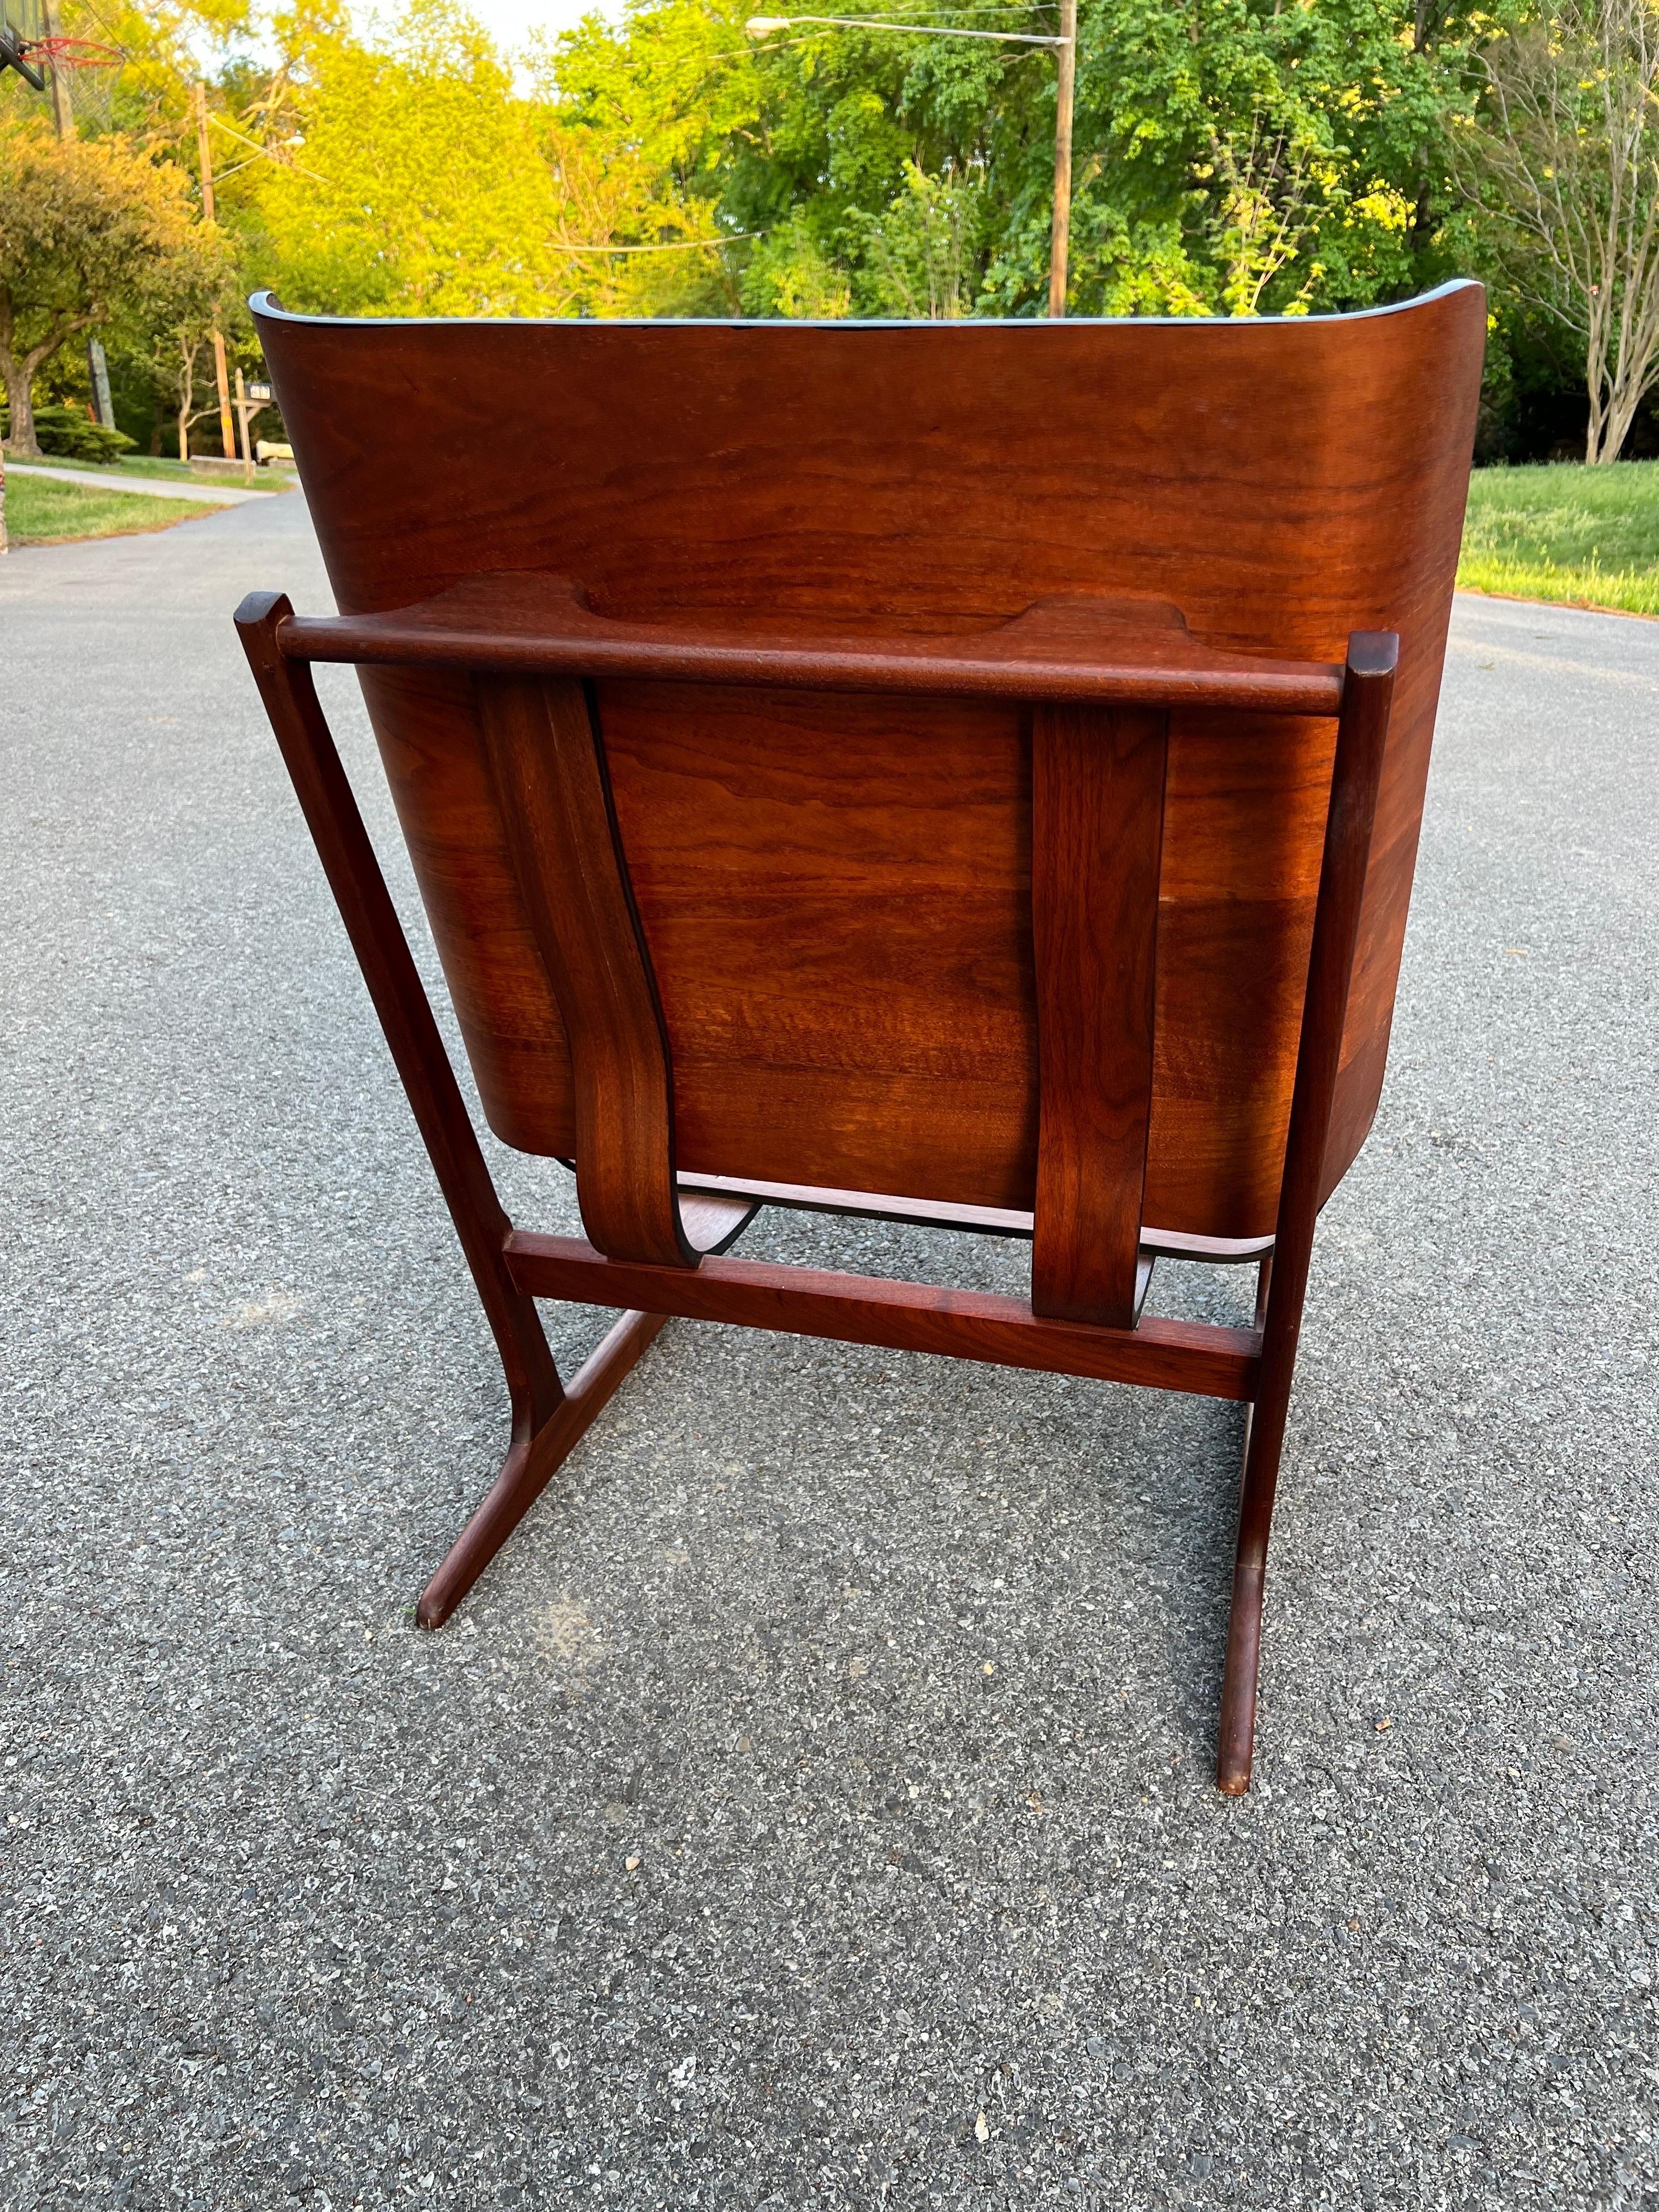 Hans Juergens Deco House Walnut Sled Lounge Chair Grete Jalk 1960s For Sale 1